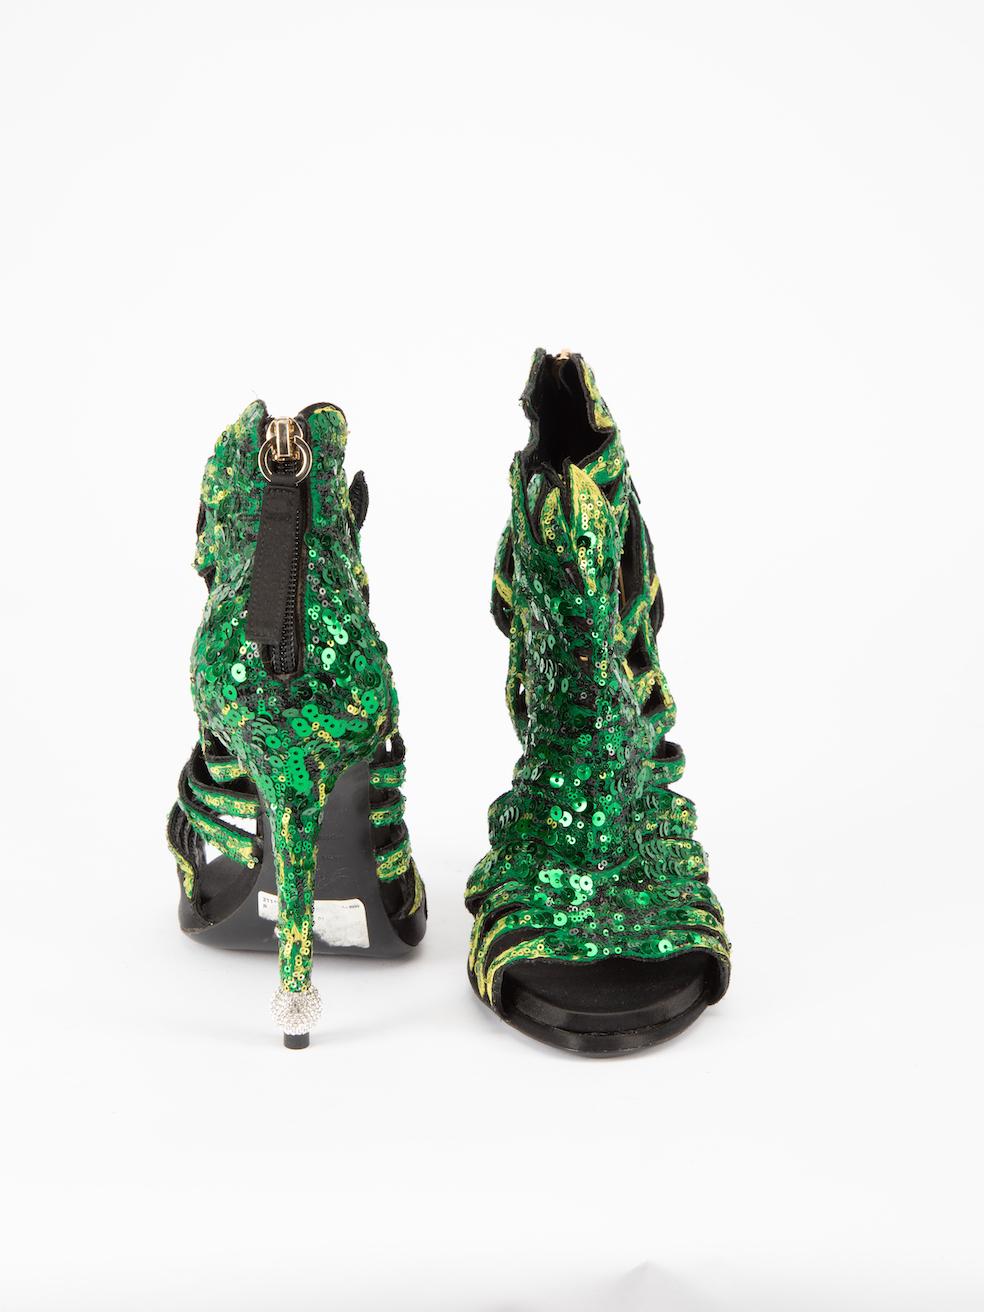 Roger Vivier Women's Green Paillette Palm Sandals In Good Condition For Sale In London, GB